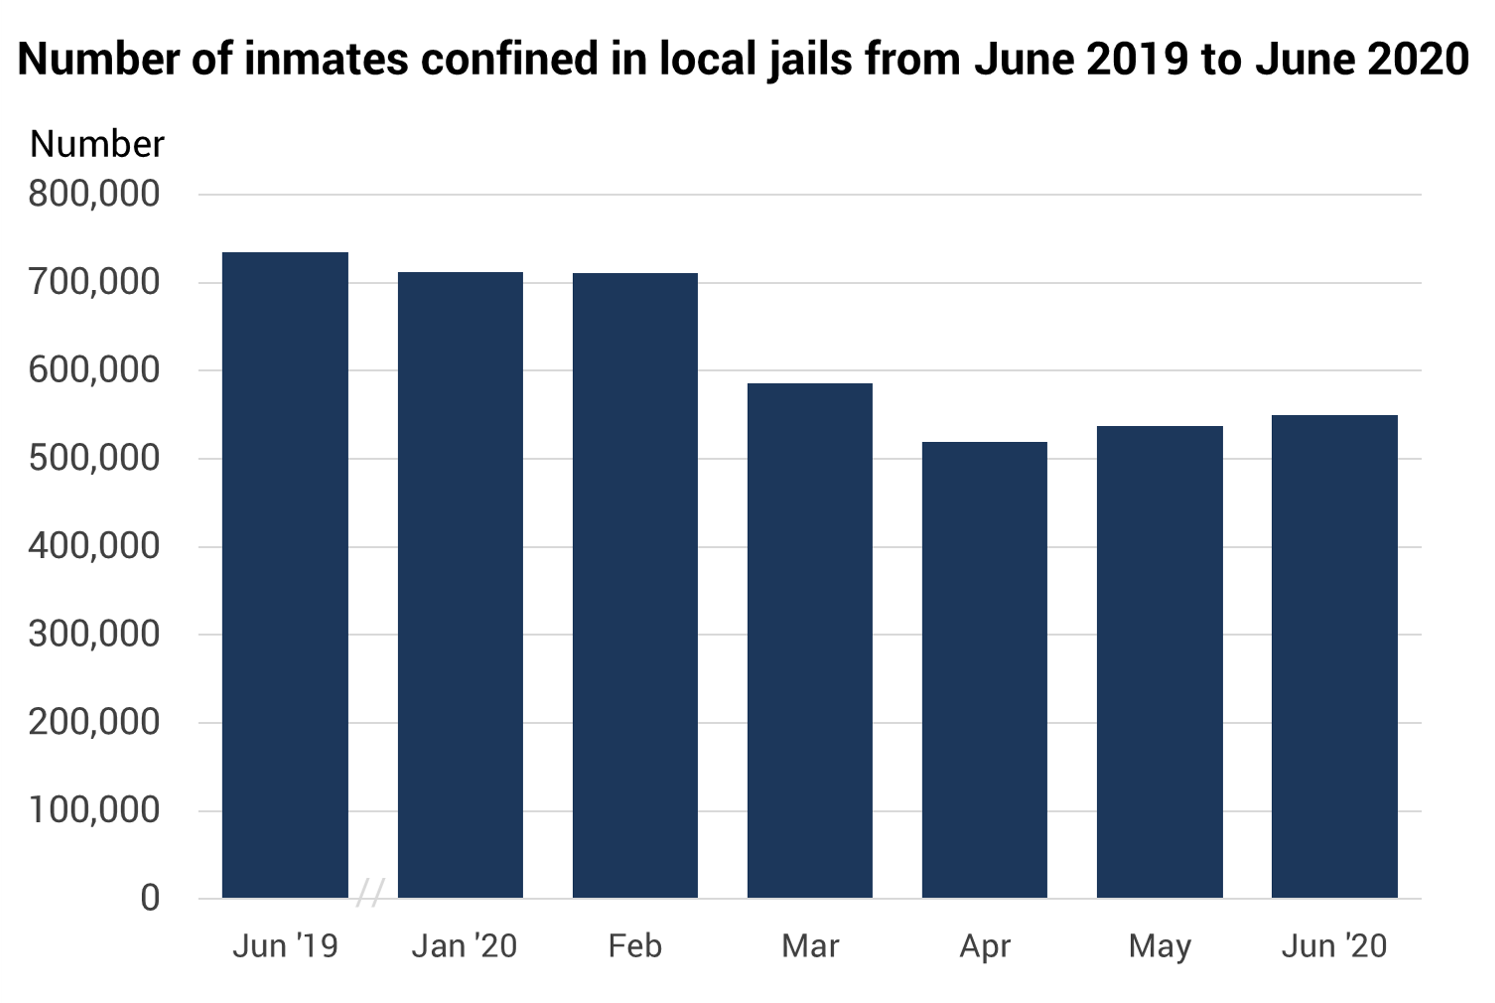 Number of inmates confined in local jails from June 2019 to June 2020